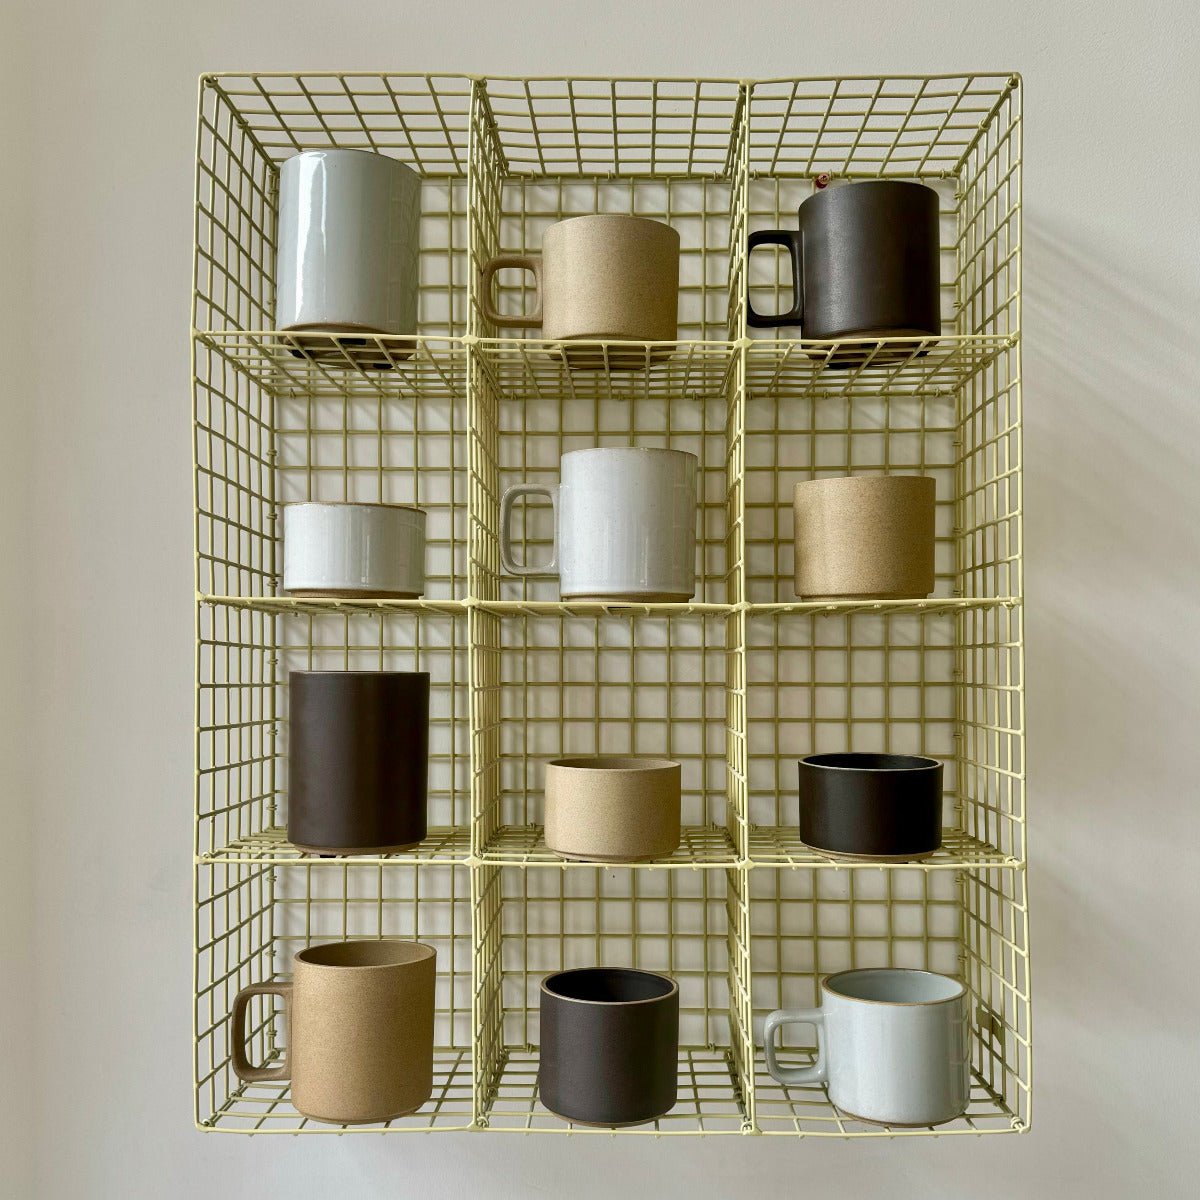 Kalager - Small Cup Rack - Wire Cabinet - DANSKmadeforrooms